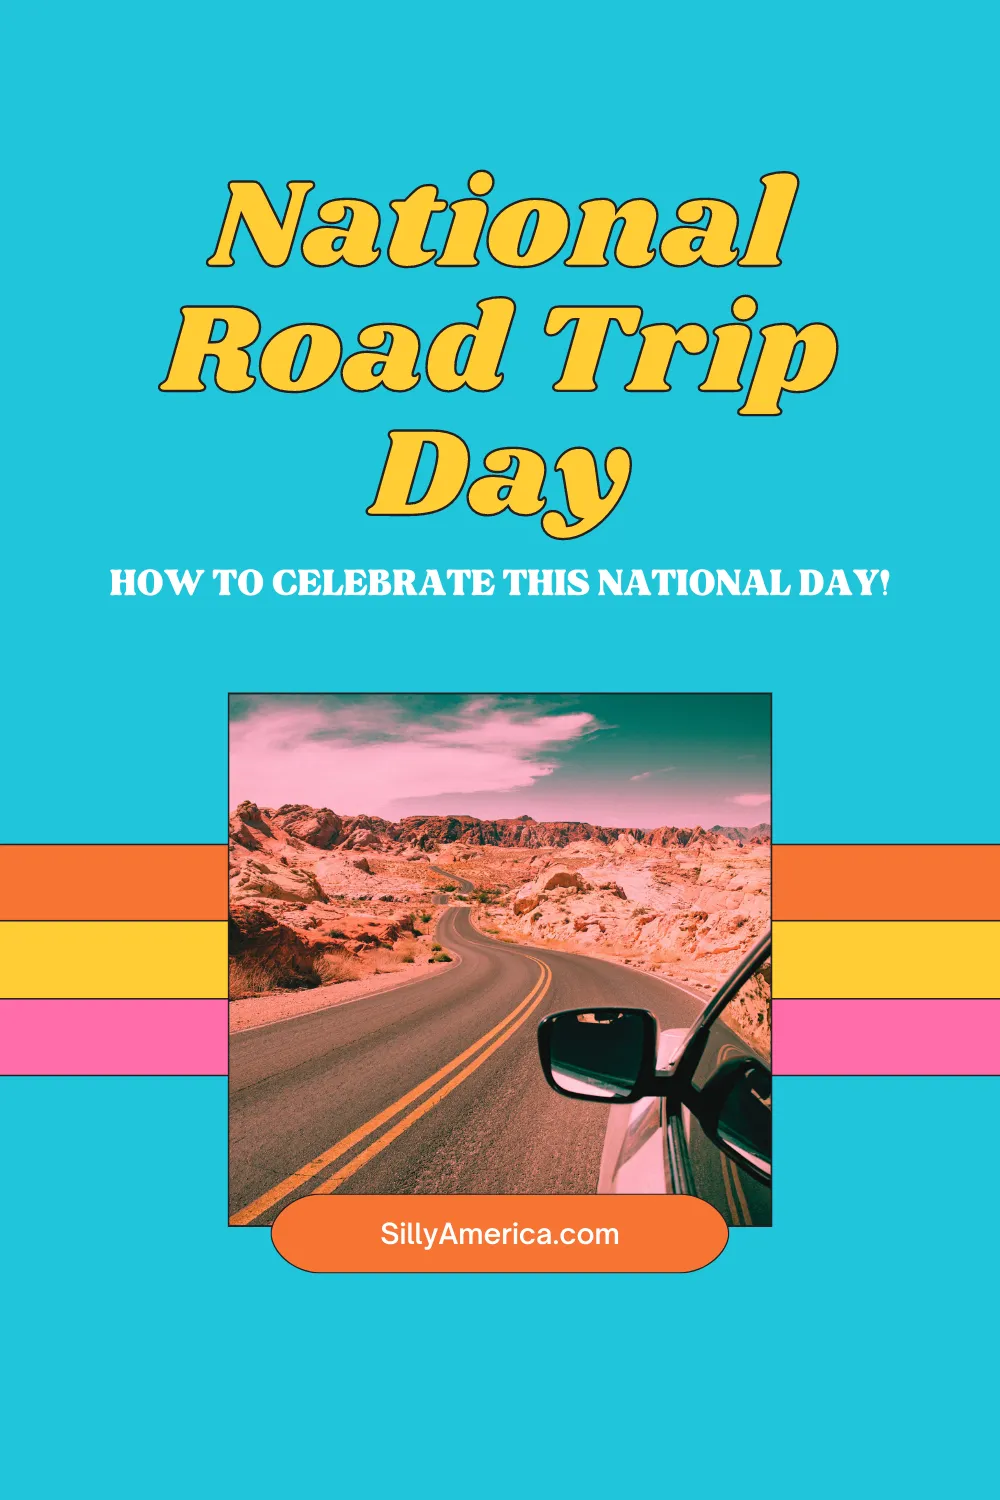 National Road Trip Day is an annual holiday dedicated to those who love hitting the road and exploring the country by land. Celebrated on the Friday before Memorial Day, this holiday serves as the official kickoff to the summer road trip season. The day comes right before Memorial Day, which itself comes at the beginning of the summer months. Where are you traveling to this National Road Trip Day? #RoadTrip #RoadTripDay #NationalRoadTripDay #RoadTripPlanning